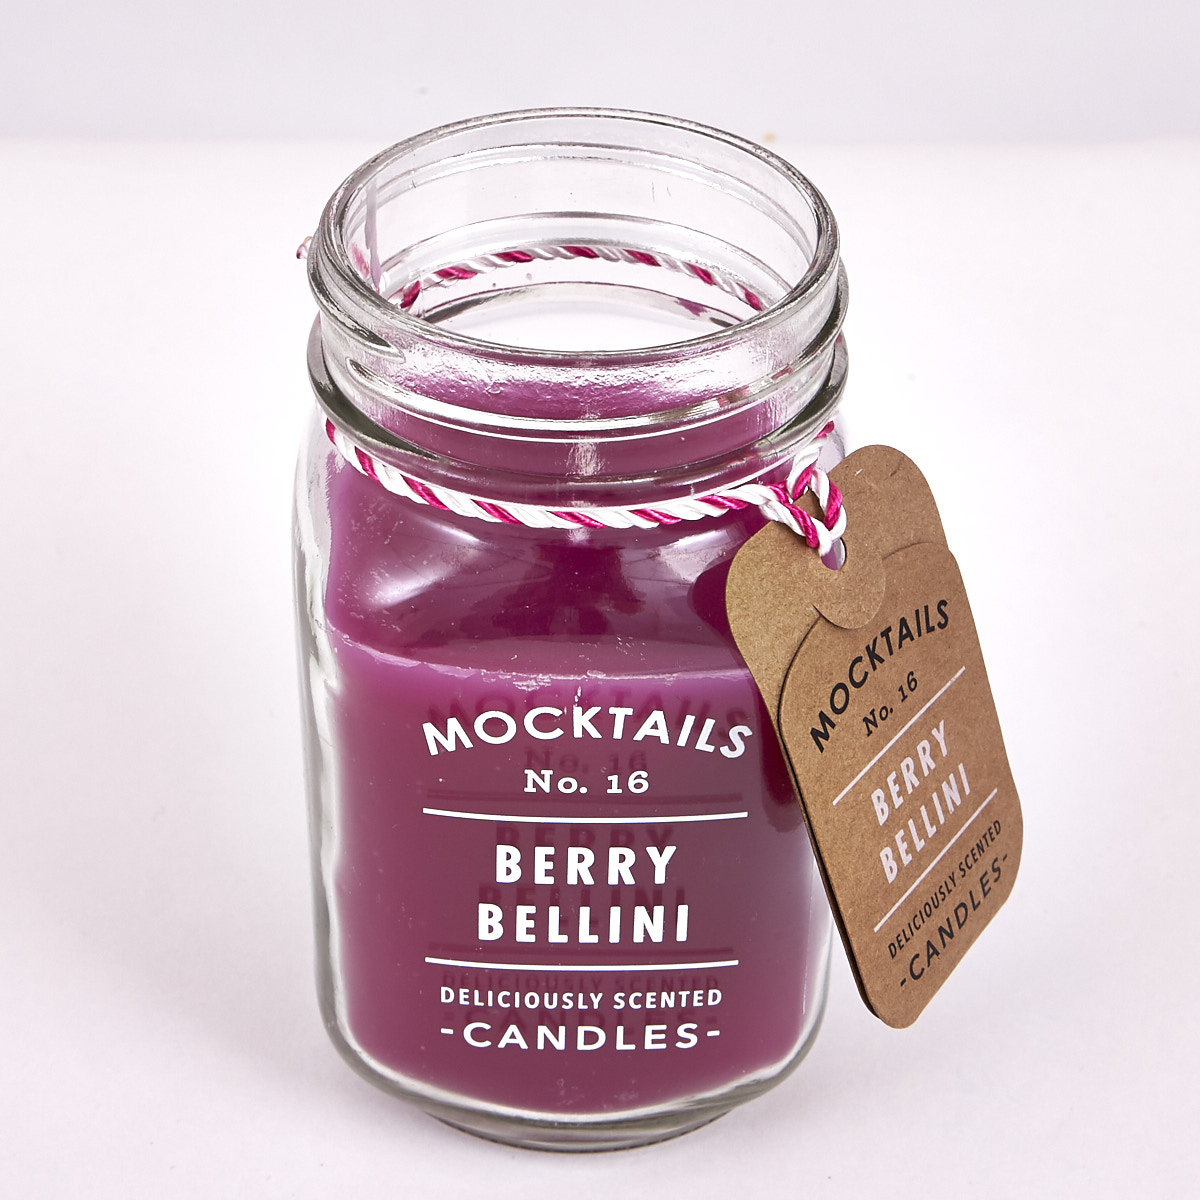 Mocktails Berry Bellini Scented Candle